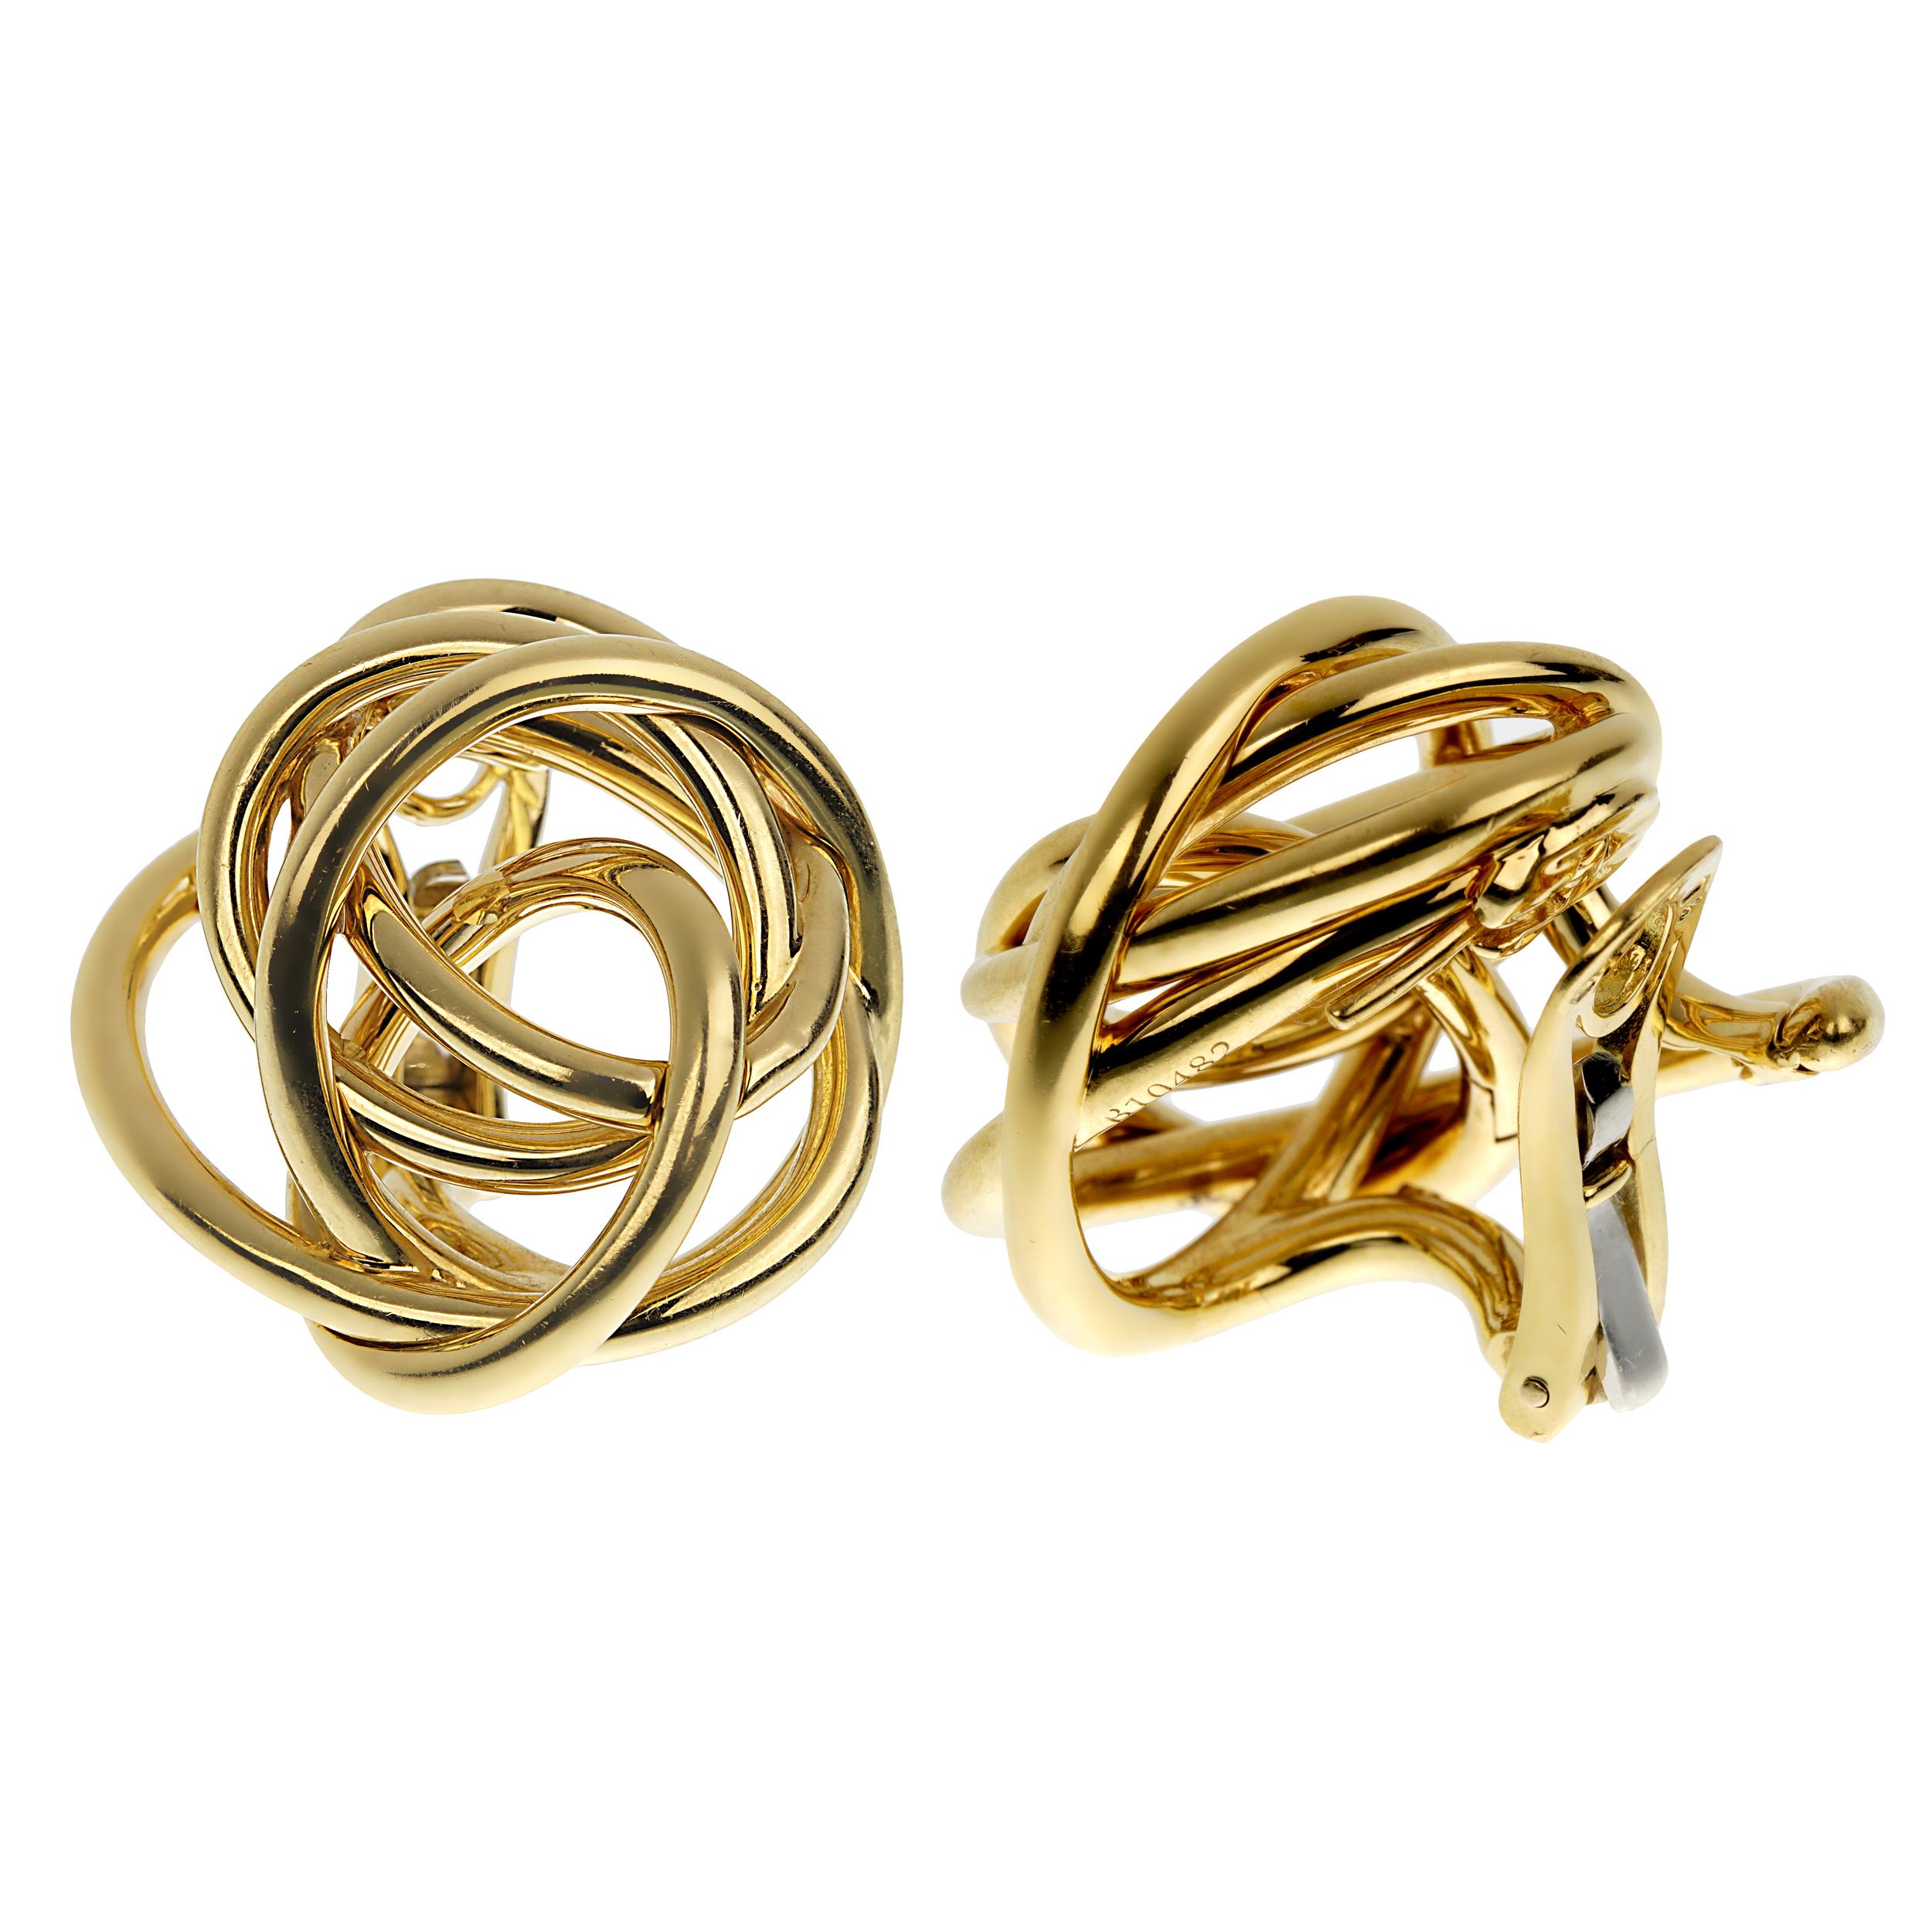 De Grisogono Matassa Yellow Gold Earrings In Excellent Condition For Sale In Feasterville, PA